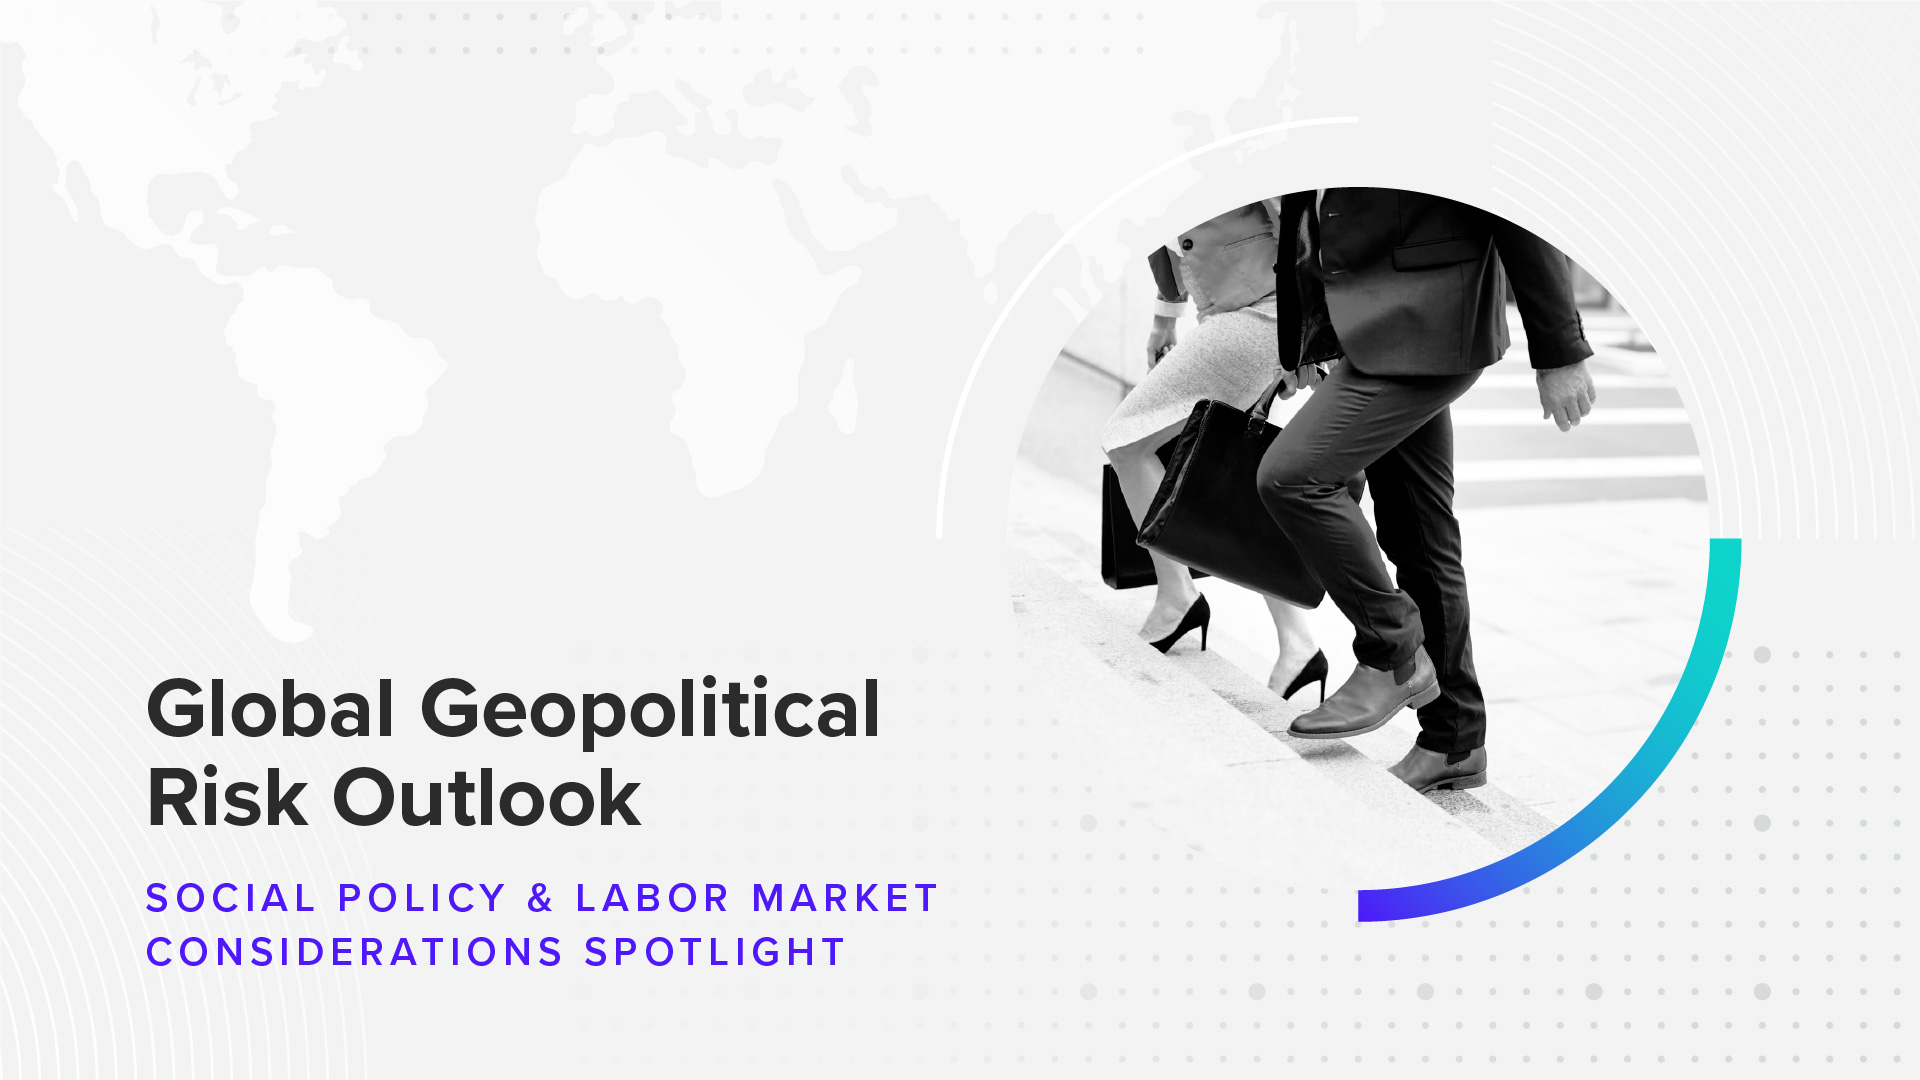 Global Geopolitical Risk Outlook: Social Policy & Labor Market Considerations Spotlight